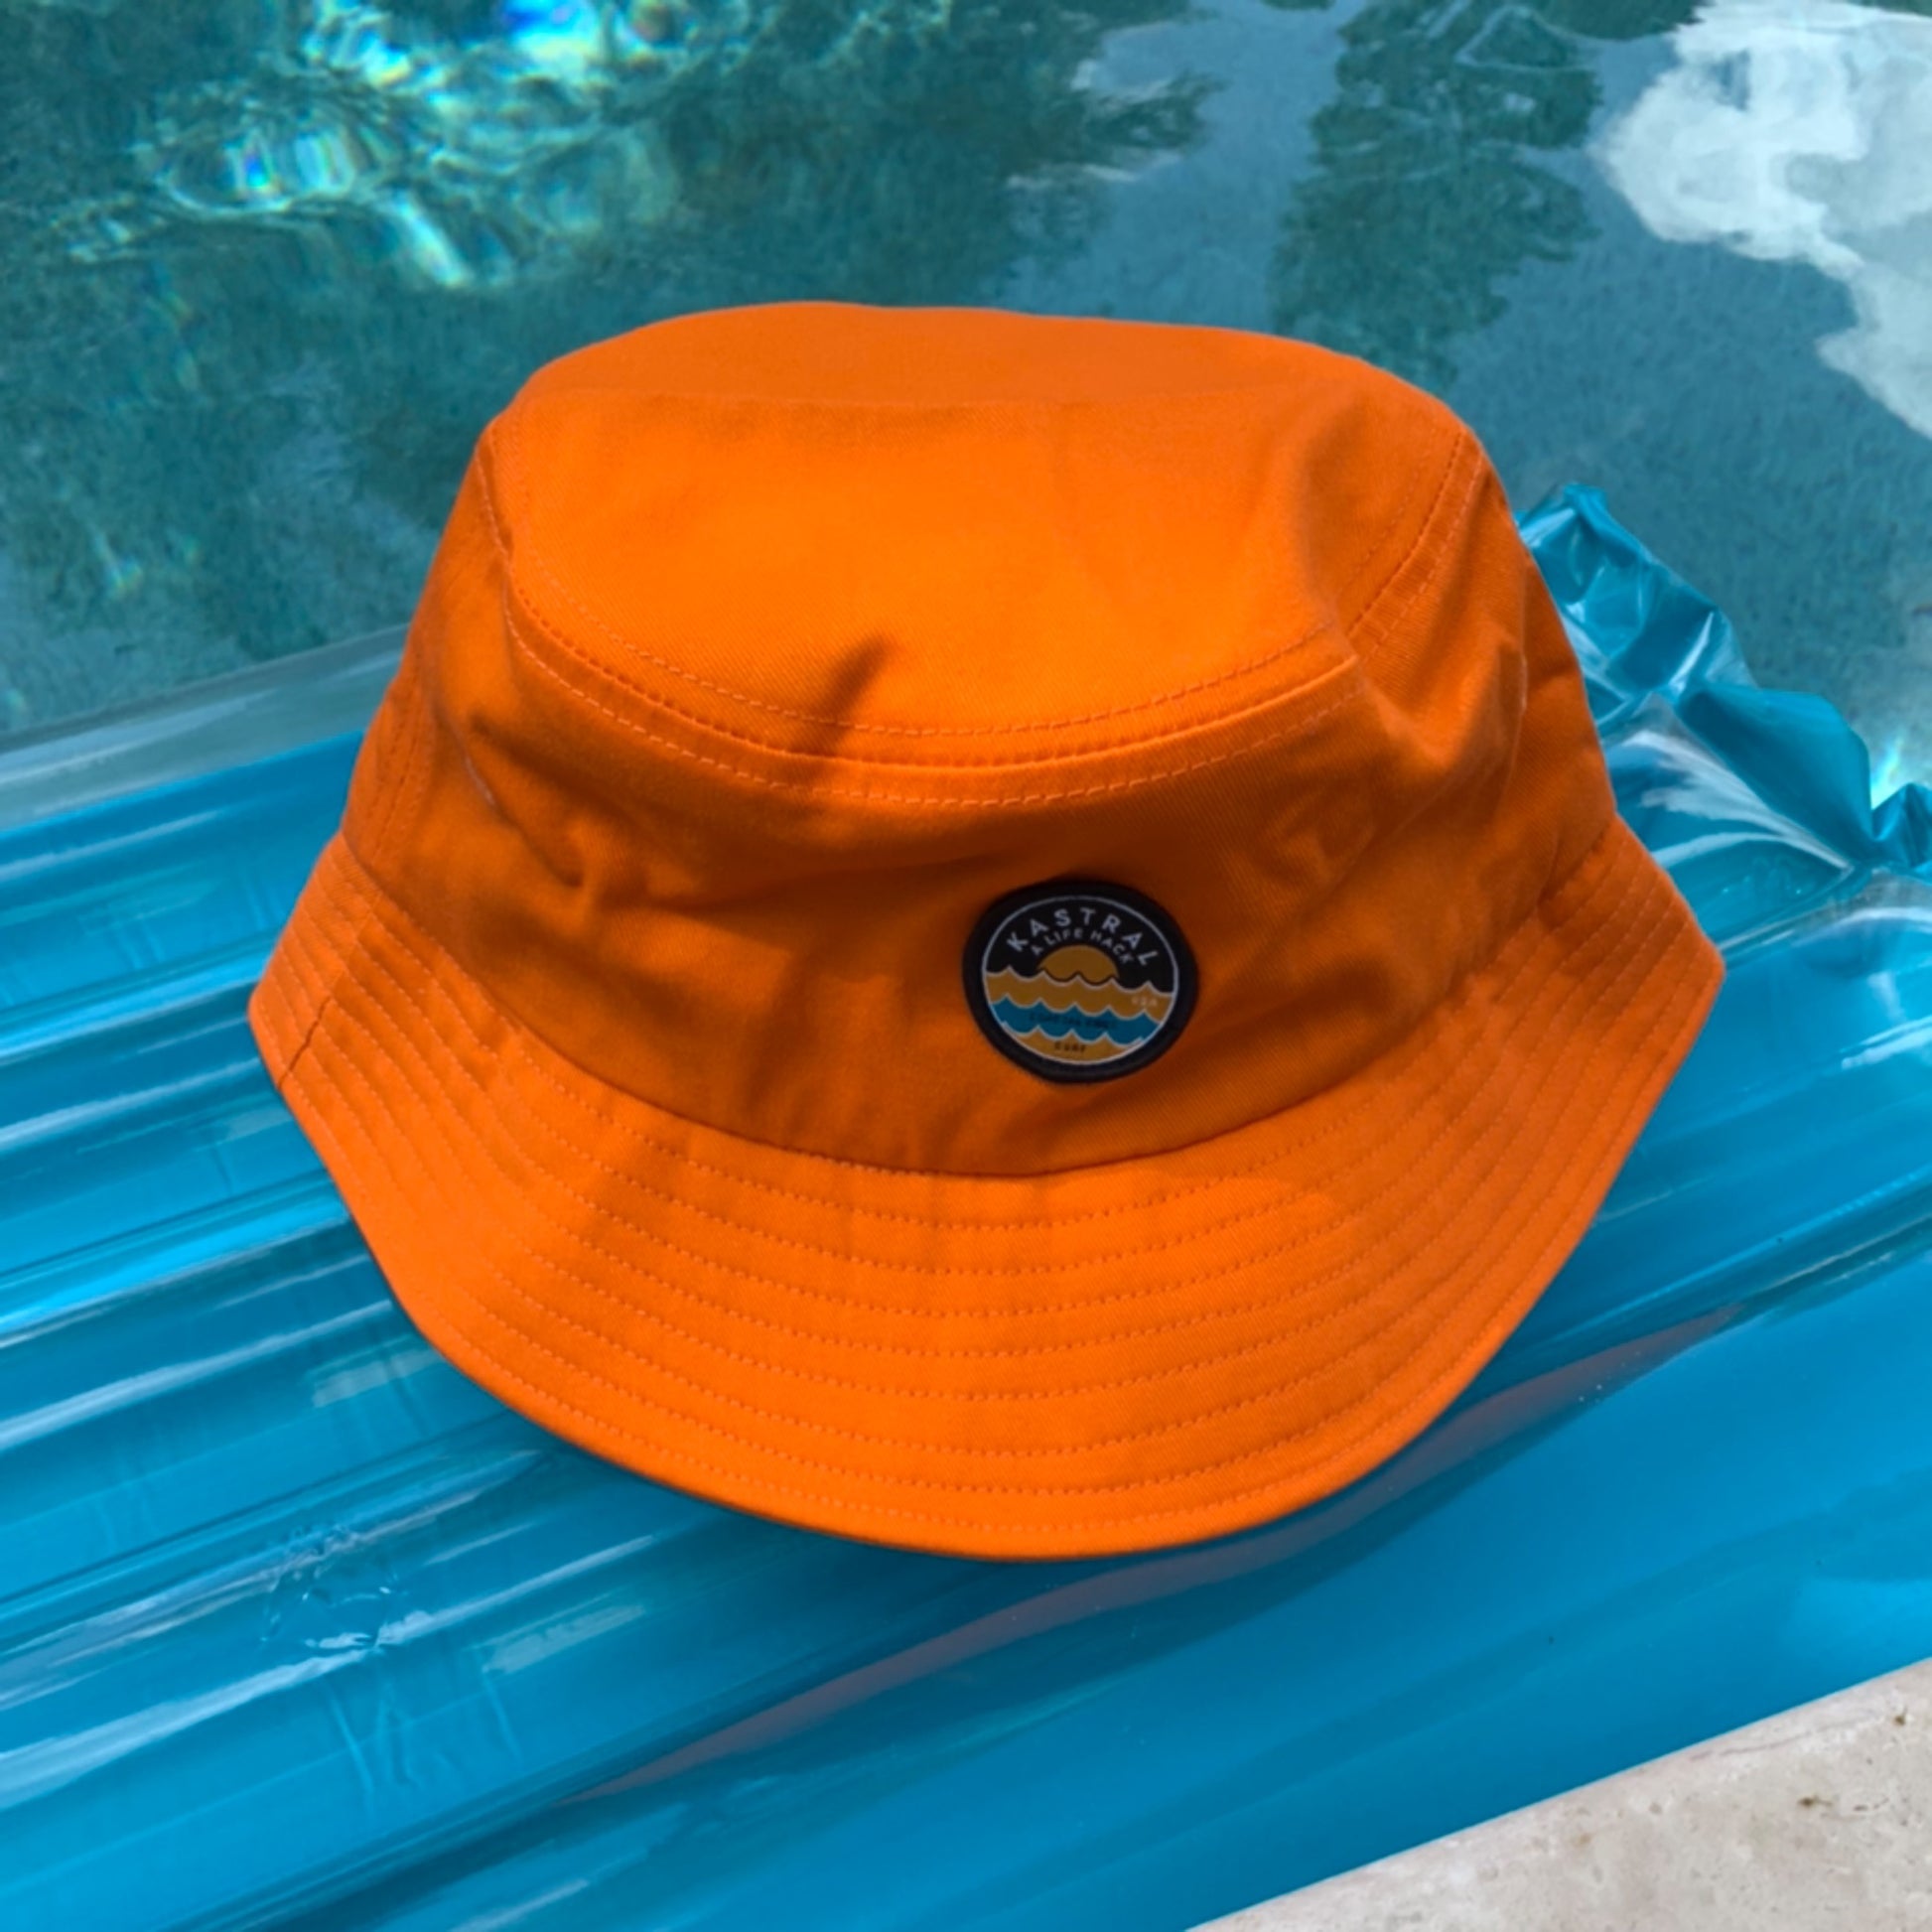 Coastal Vibes Bucket Hat from Kastral Outdoor Brand in Pool